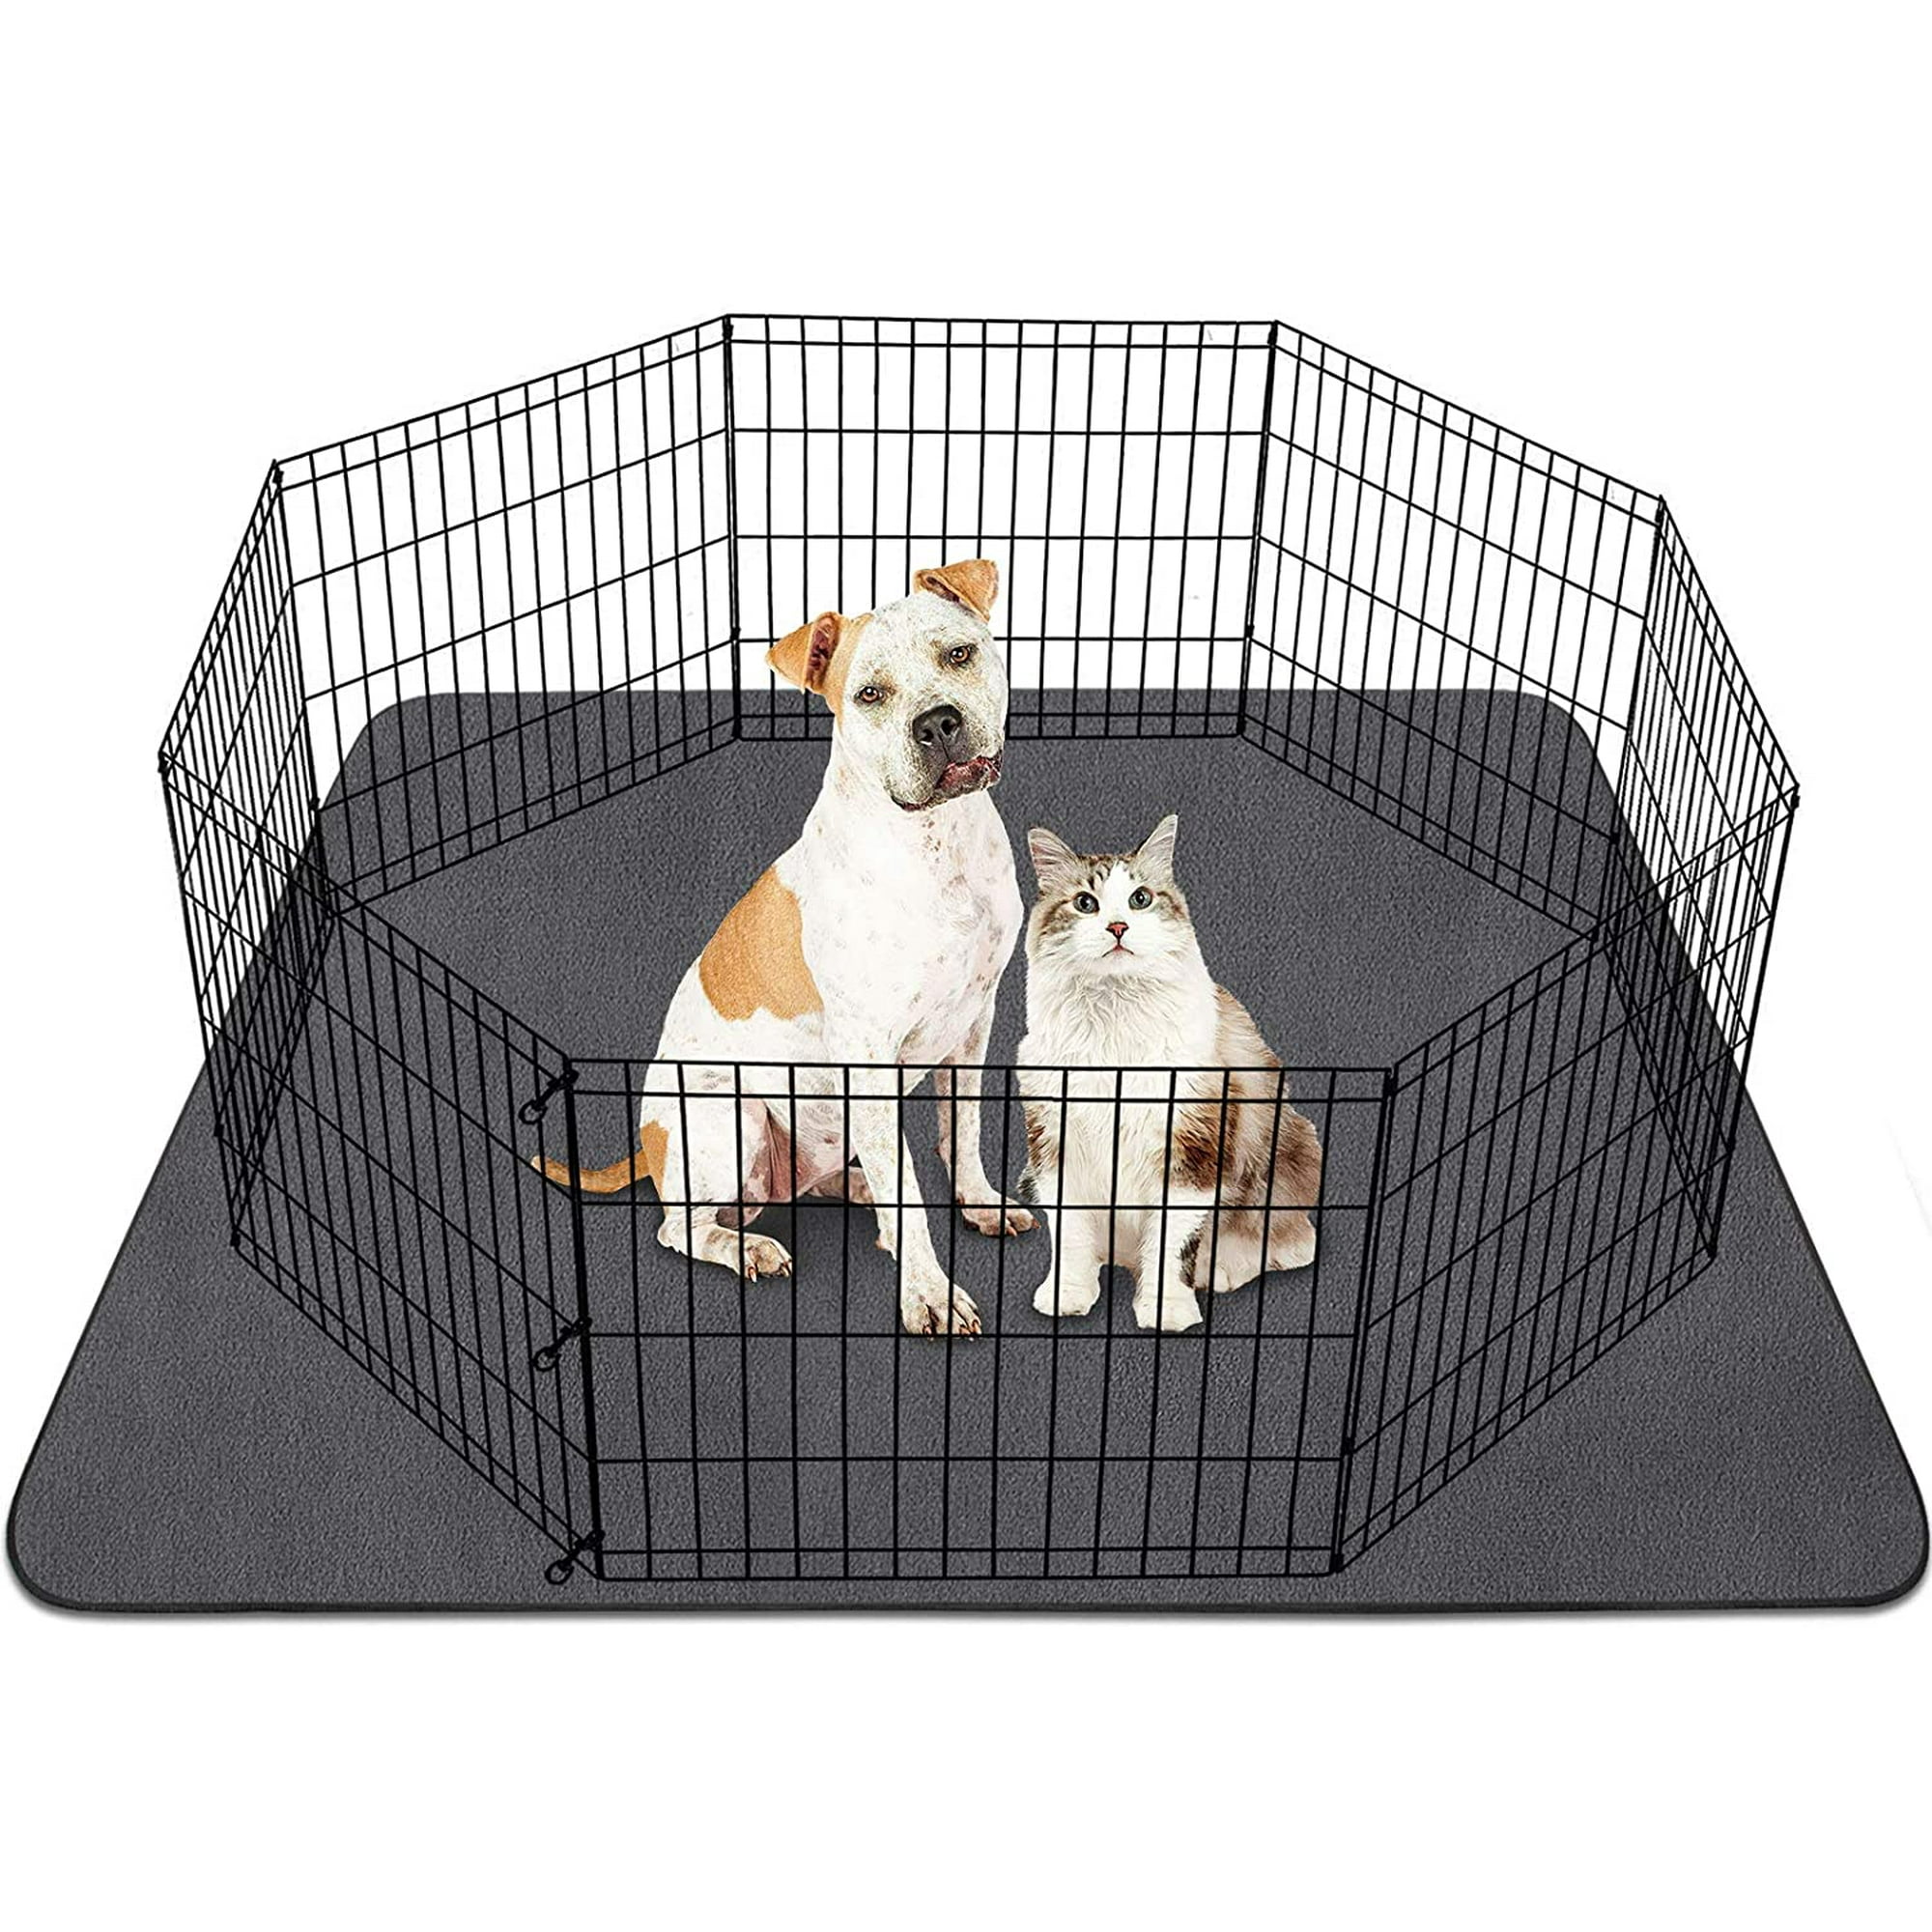 should you put puppy pads in the crate